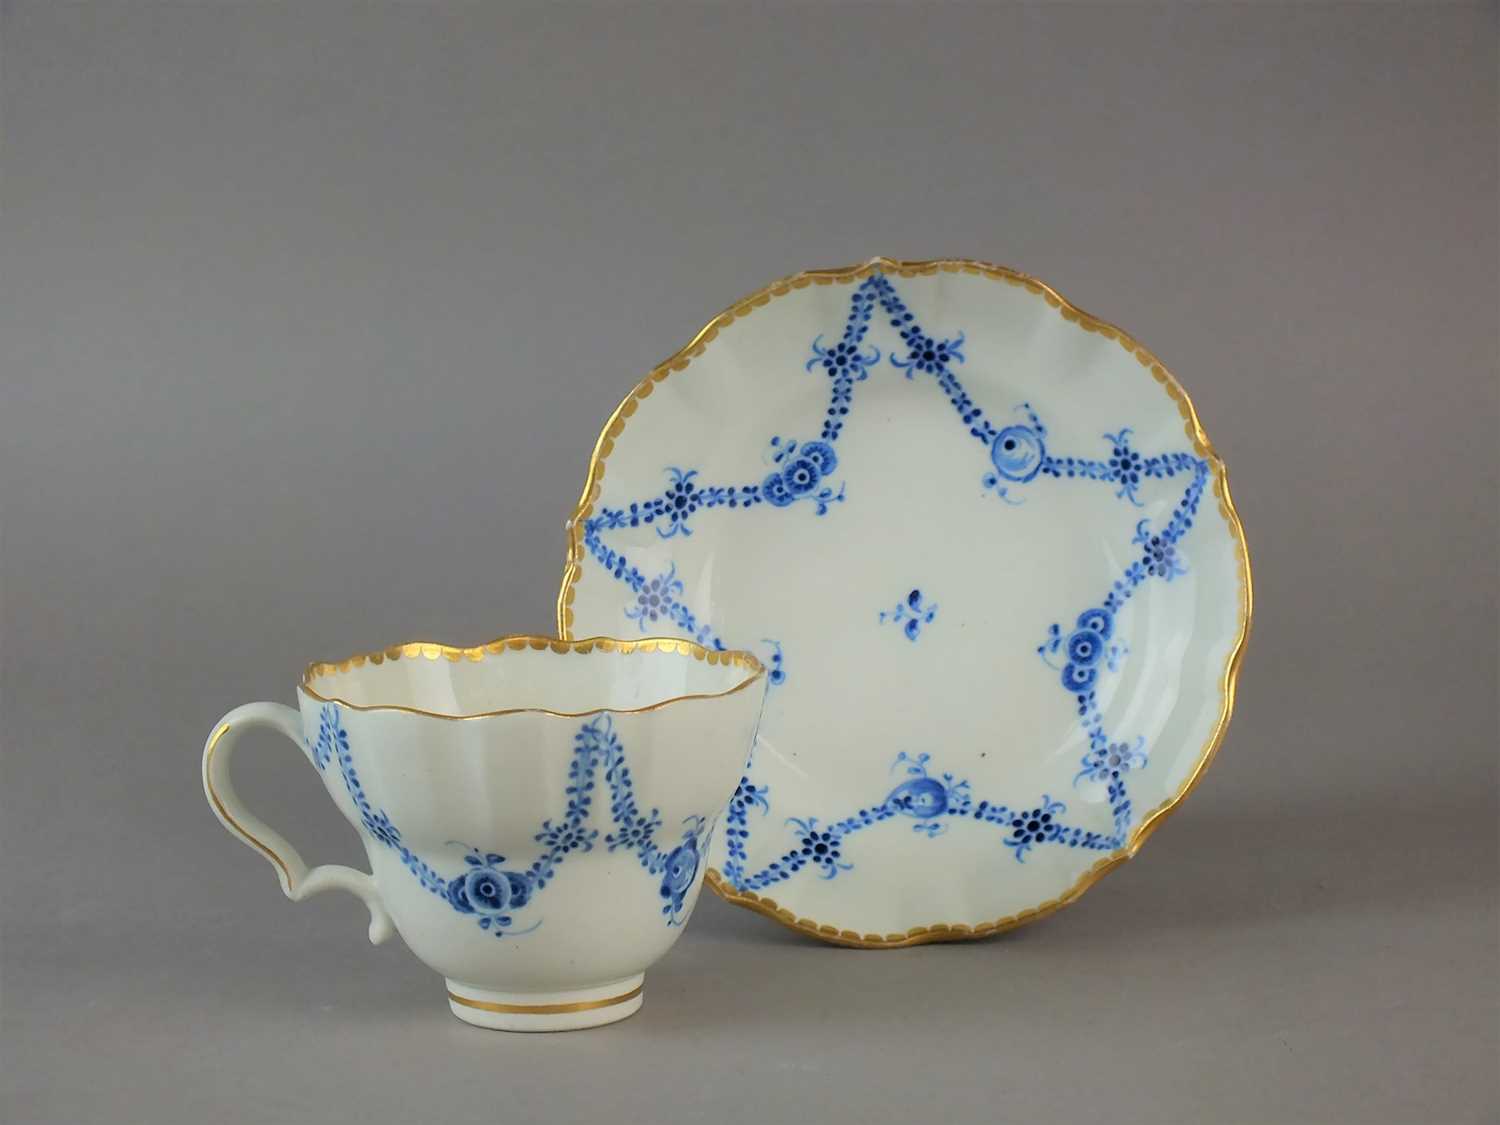 Lot 203 - Caughley 'Rose Festoon' teacup and saucer